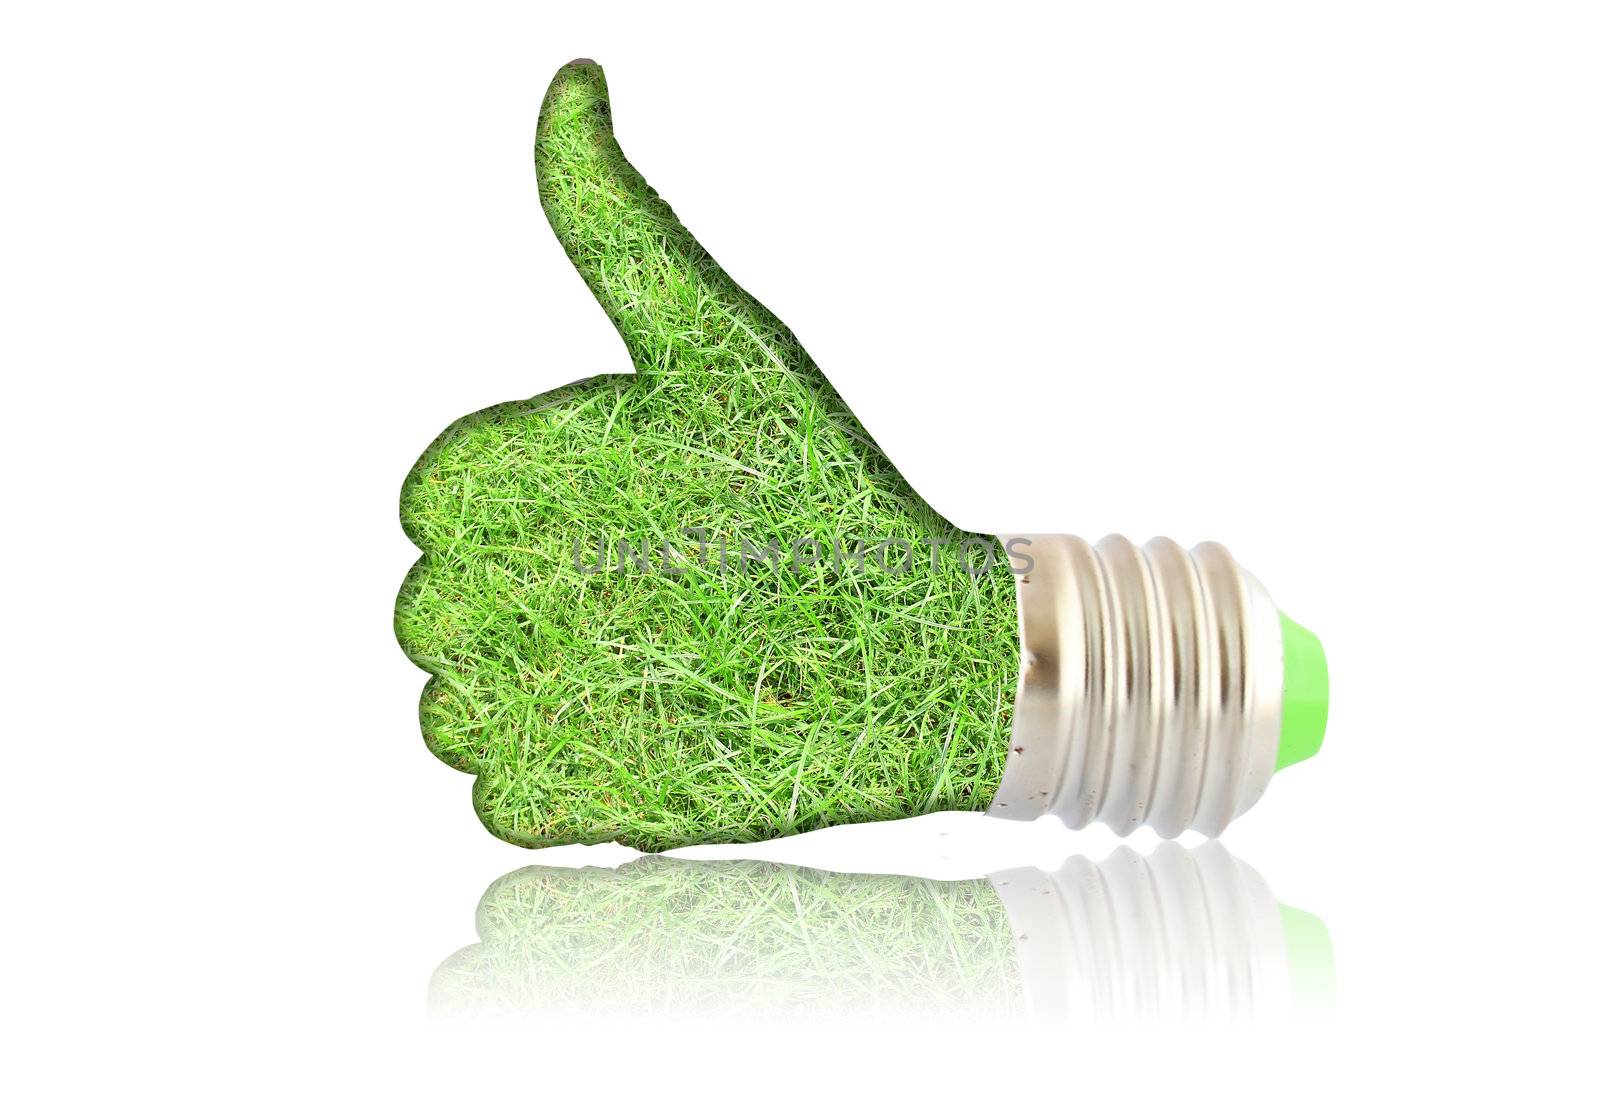 lightbulb - hand with grass. Concept - eco energy  by rufous